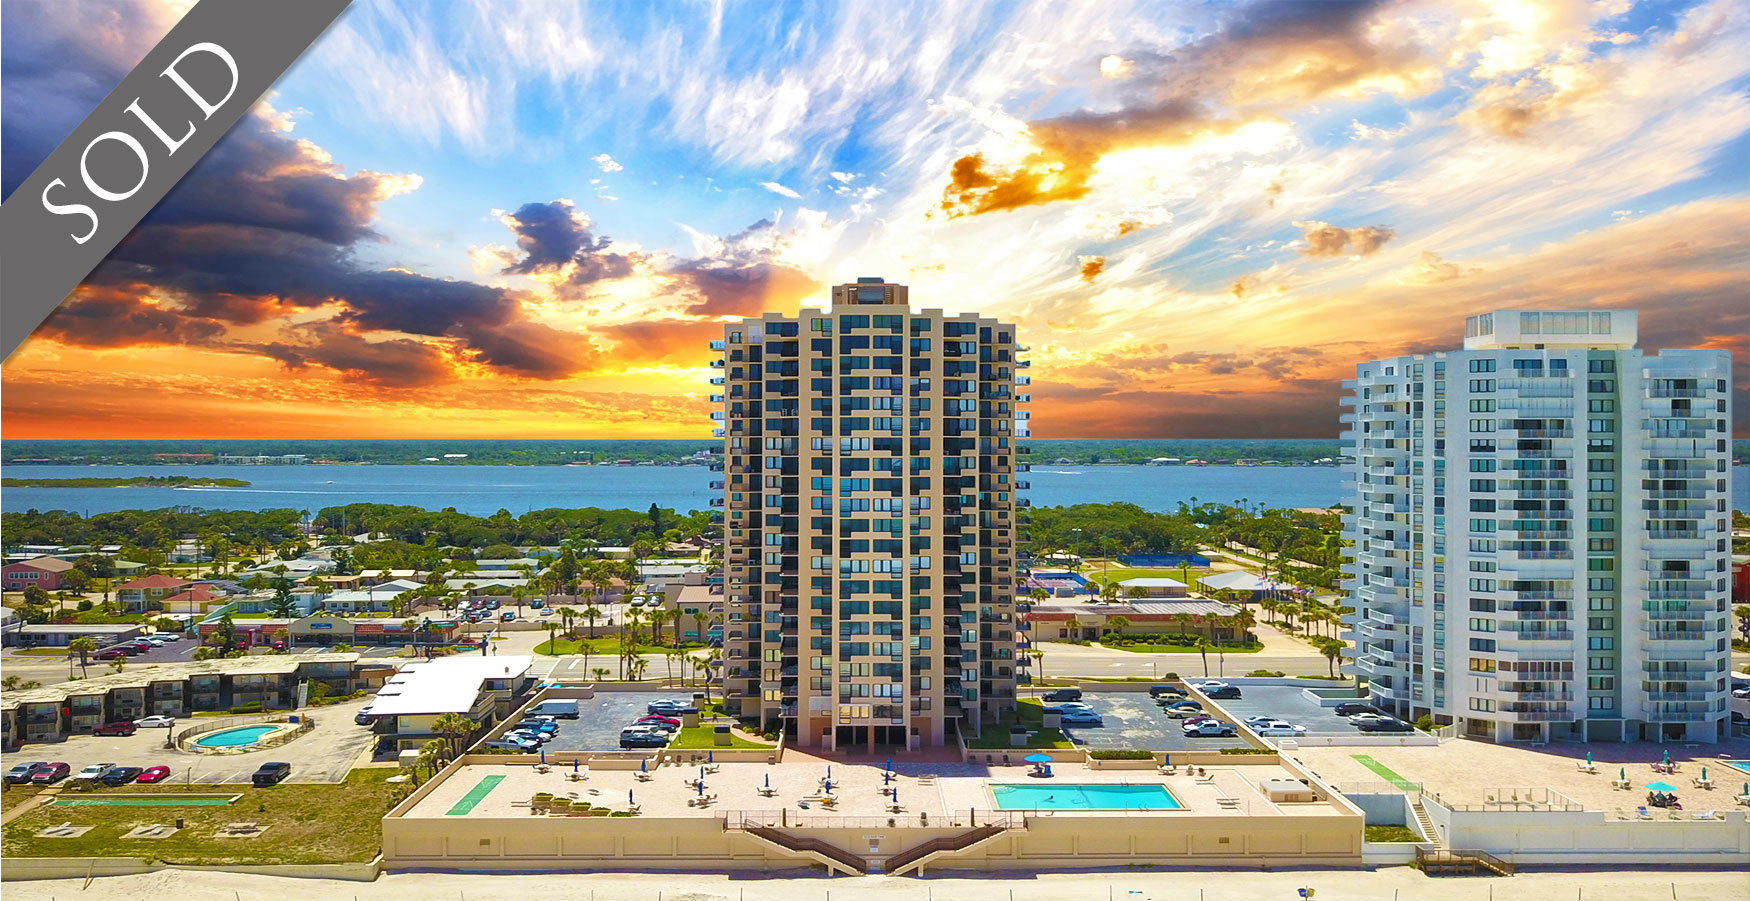 Oceans One Condos For Sale Oceanfront Real Estate at 3051 S Atlantic Ave Daytona Beach Shores, FL  Sold